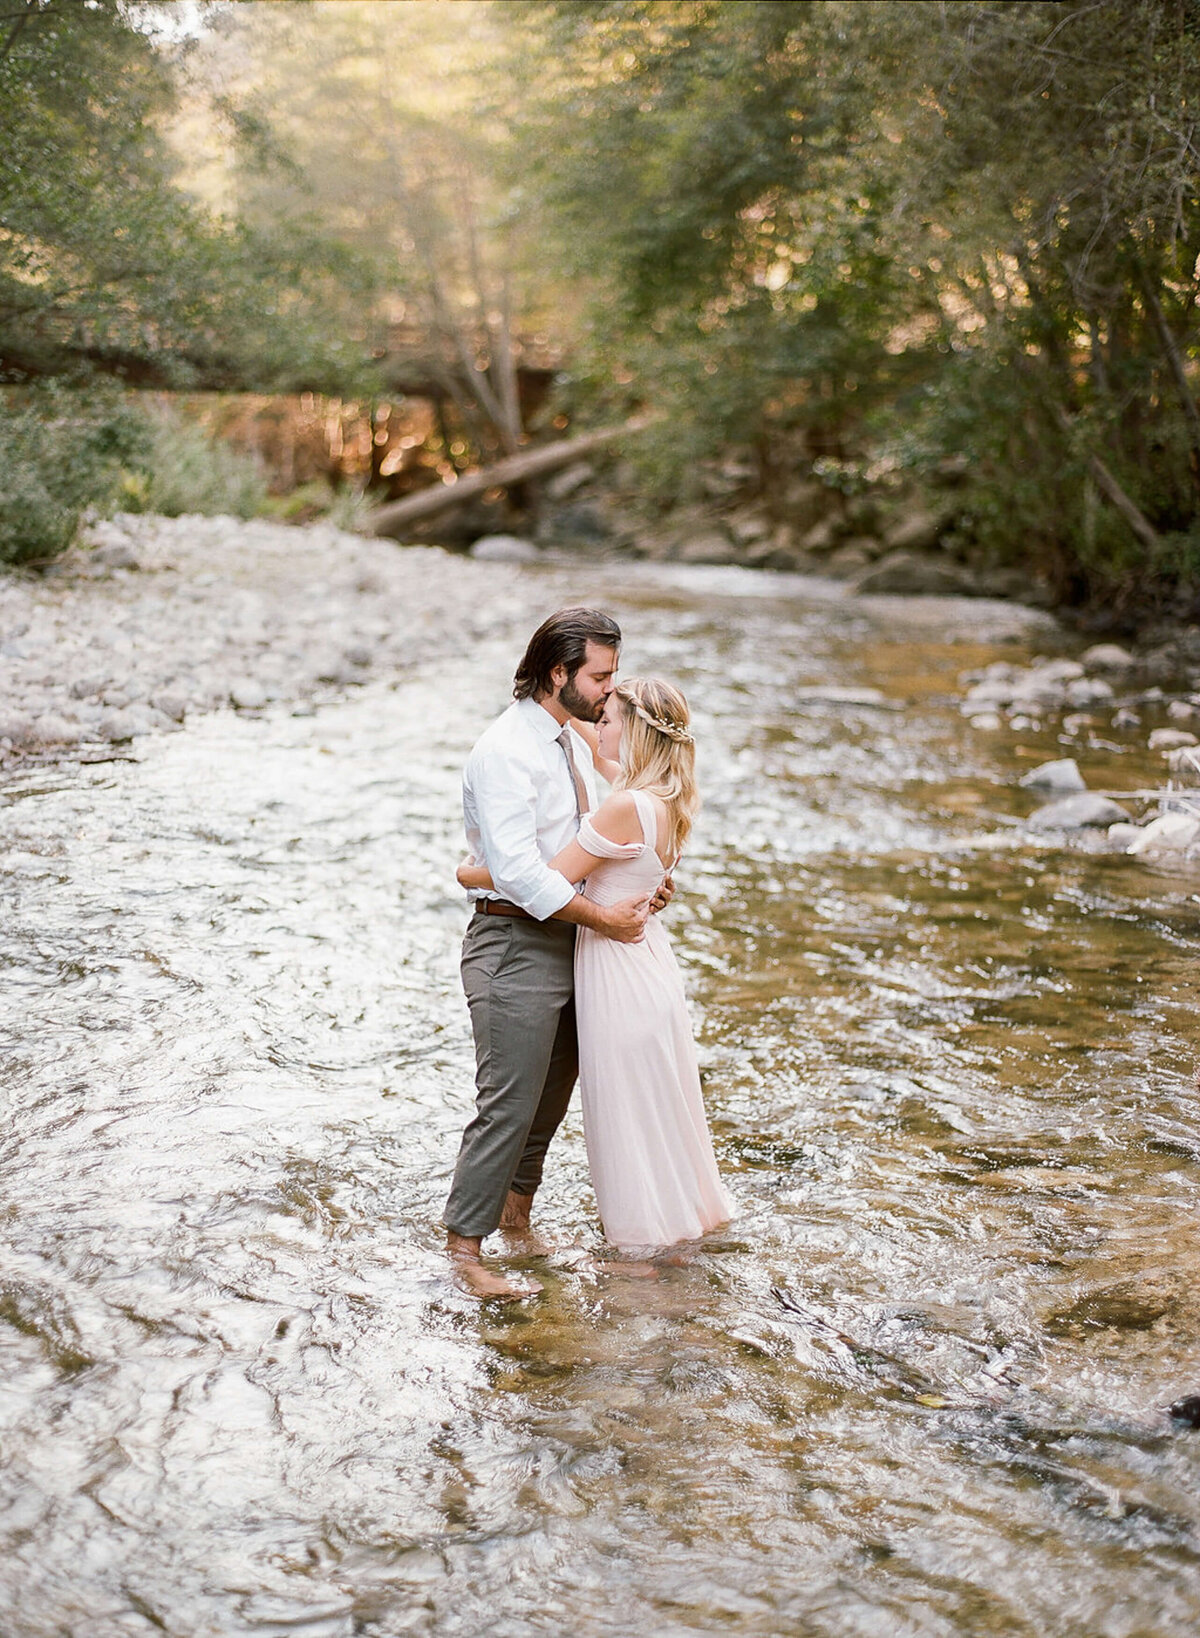 big-sure-engagement-session-clay-austin-photography-12